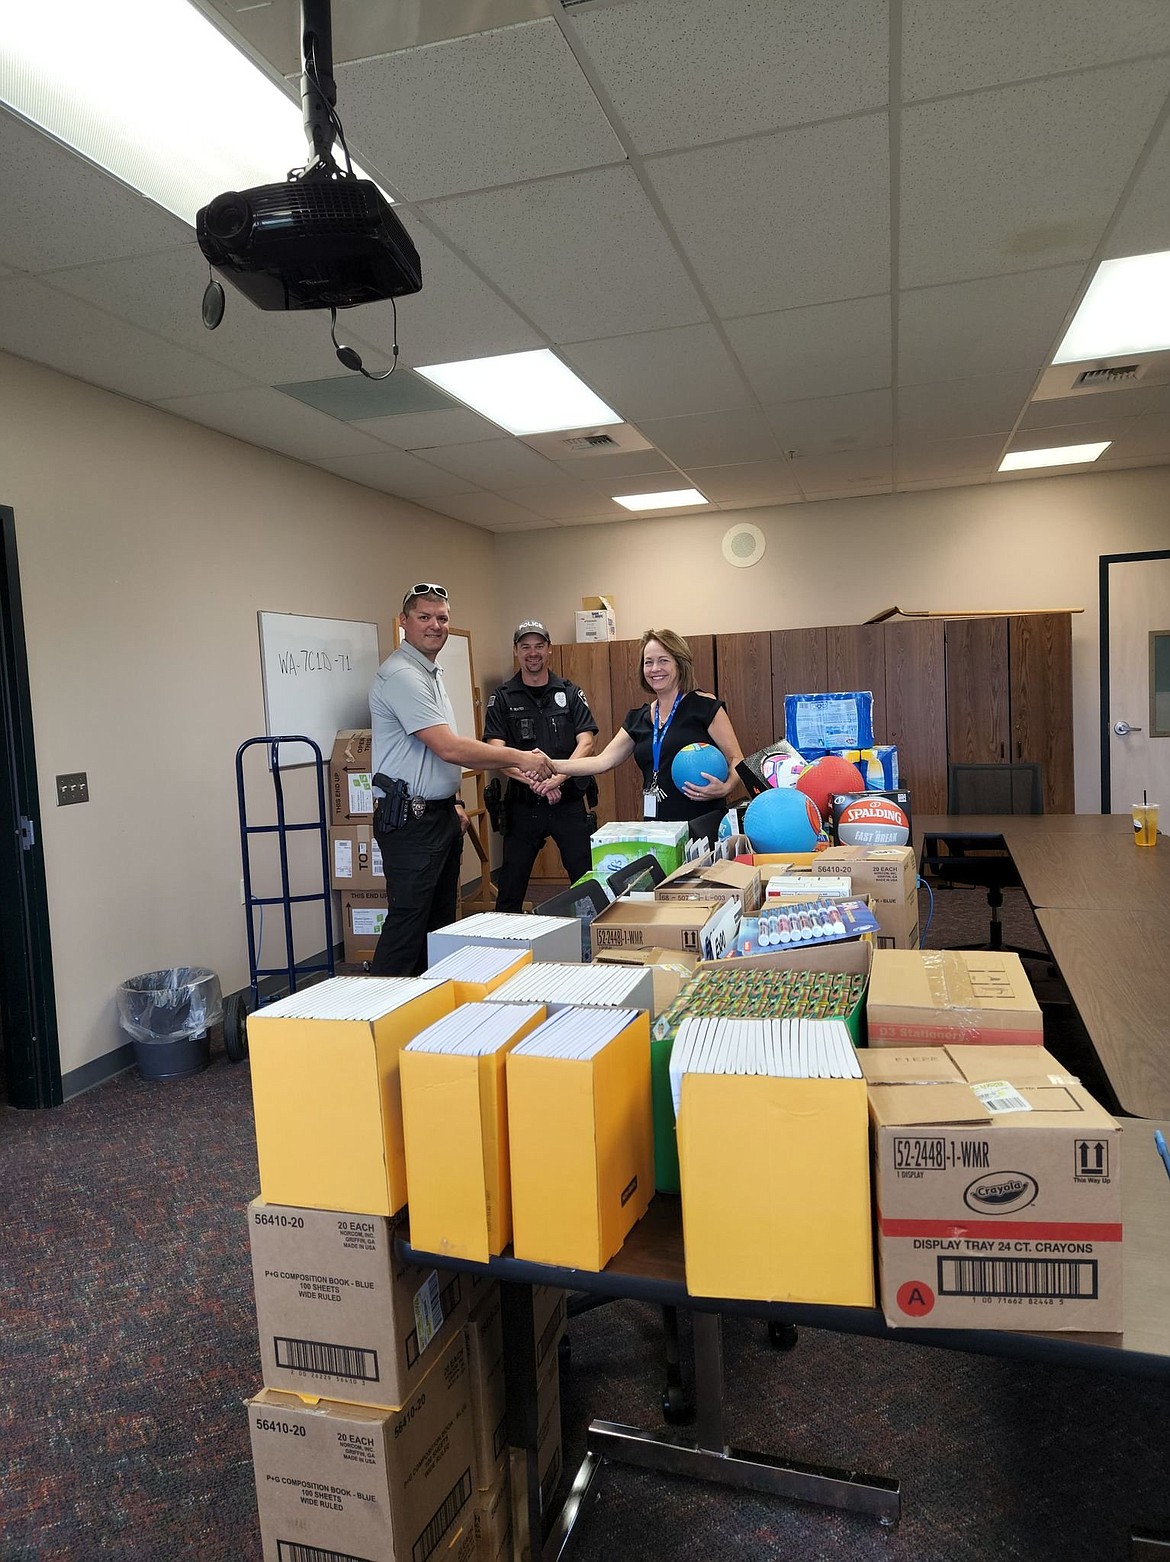 The Benevolent Fund is supported through grants, donations, and fundraisers put on by SLPD and is used to support different needs of the Soap Lake Community.